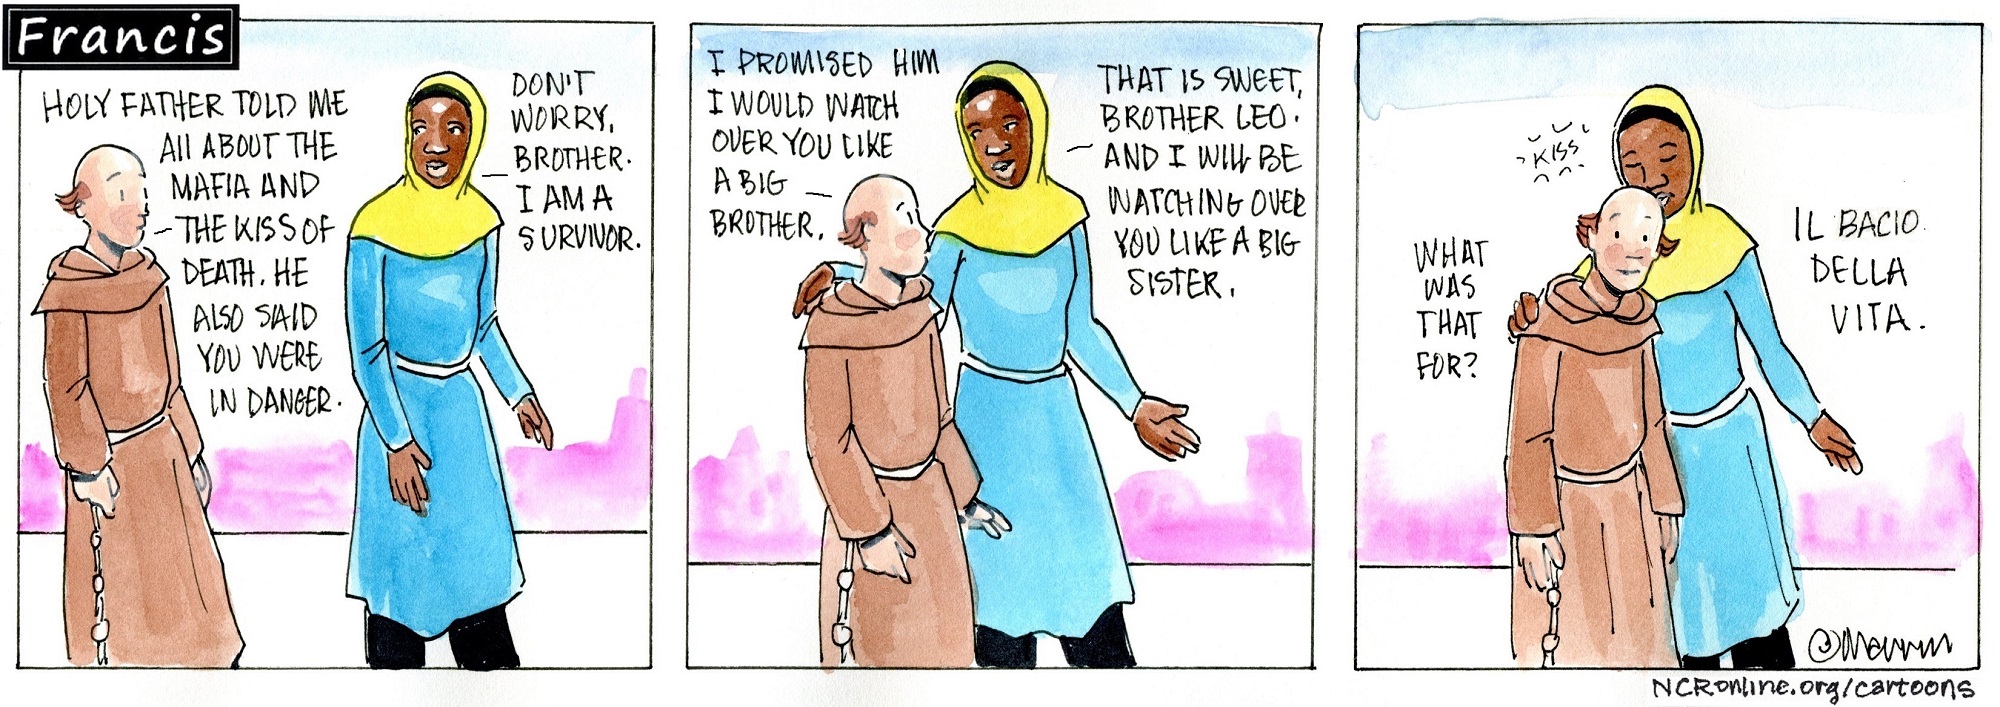 Francis, the comic strip: Gabby and Brother Leo look out for each other.